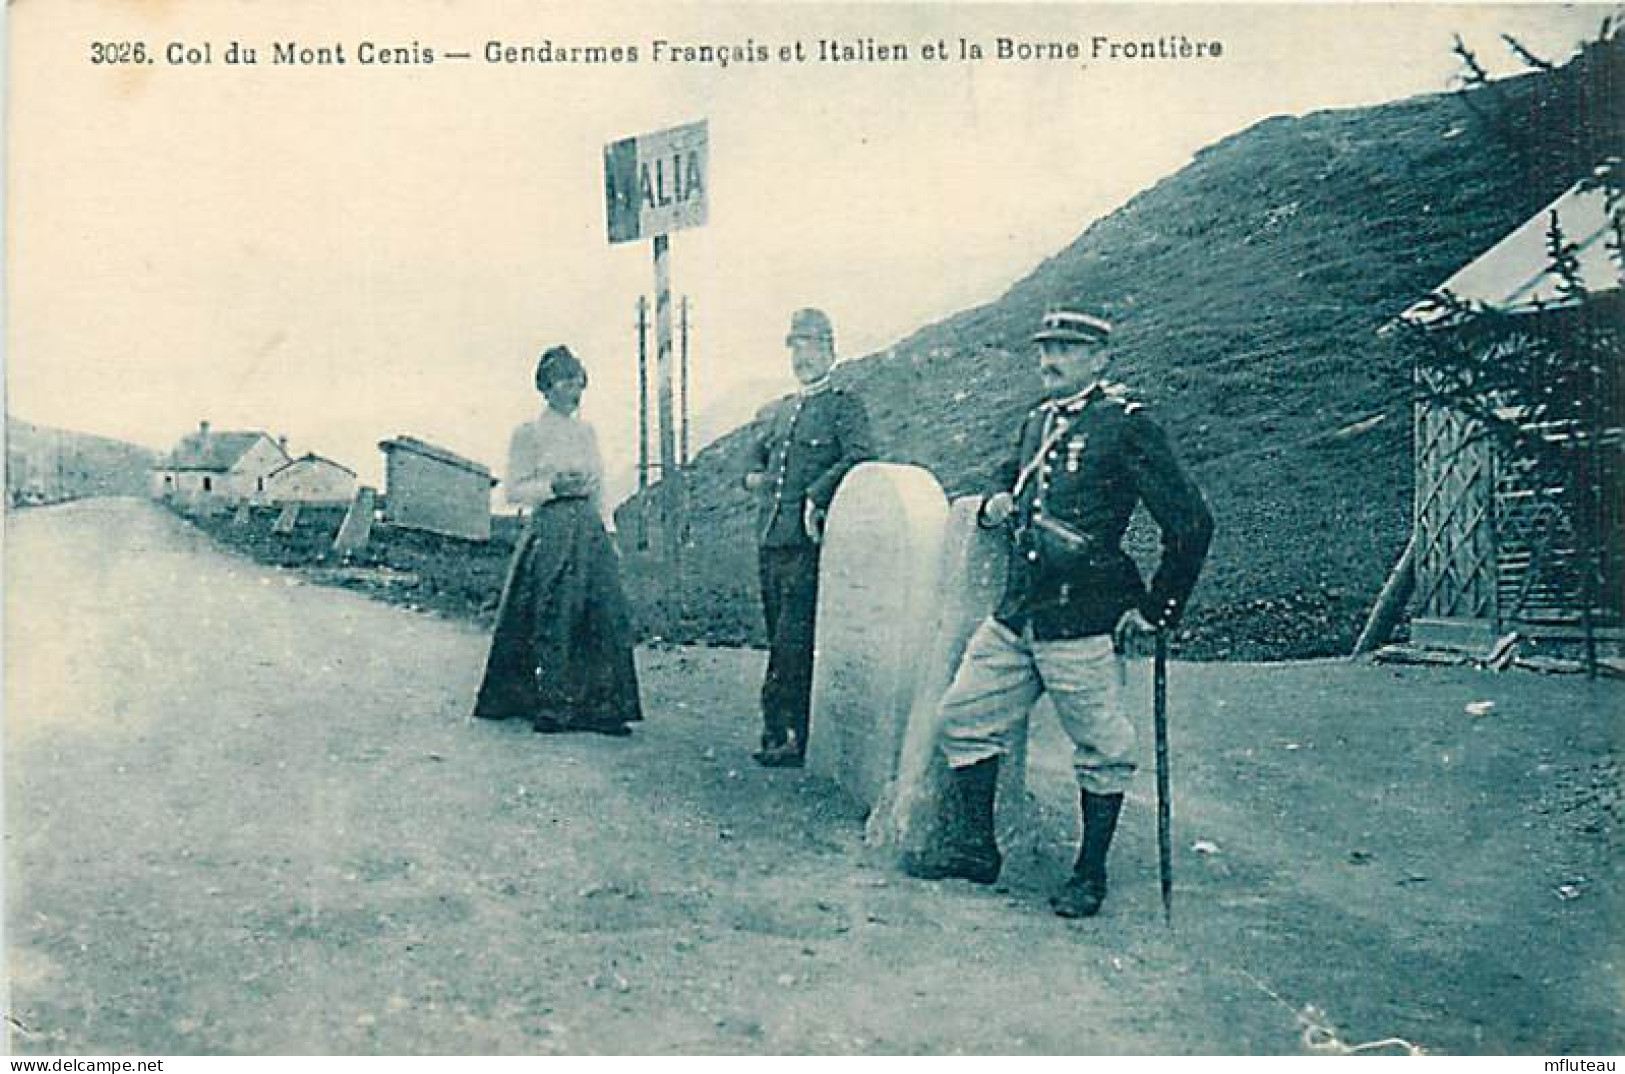 73* MONT CENIS  Fronriere  Gendarmes Francais Et Italien            RL06.1202 - Polizia – Gendarmeria